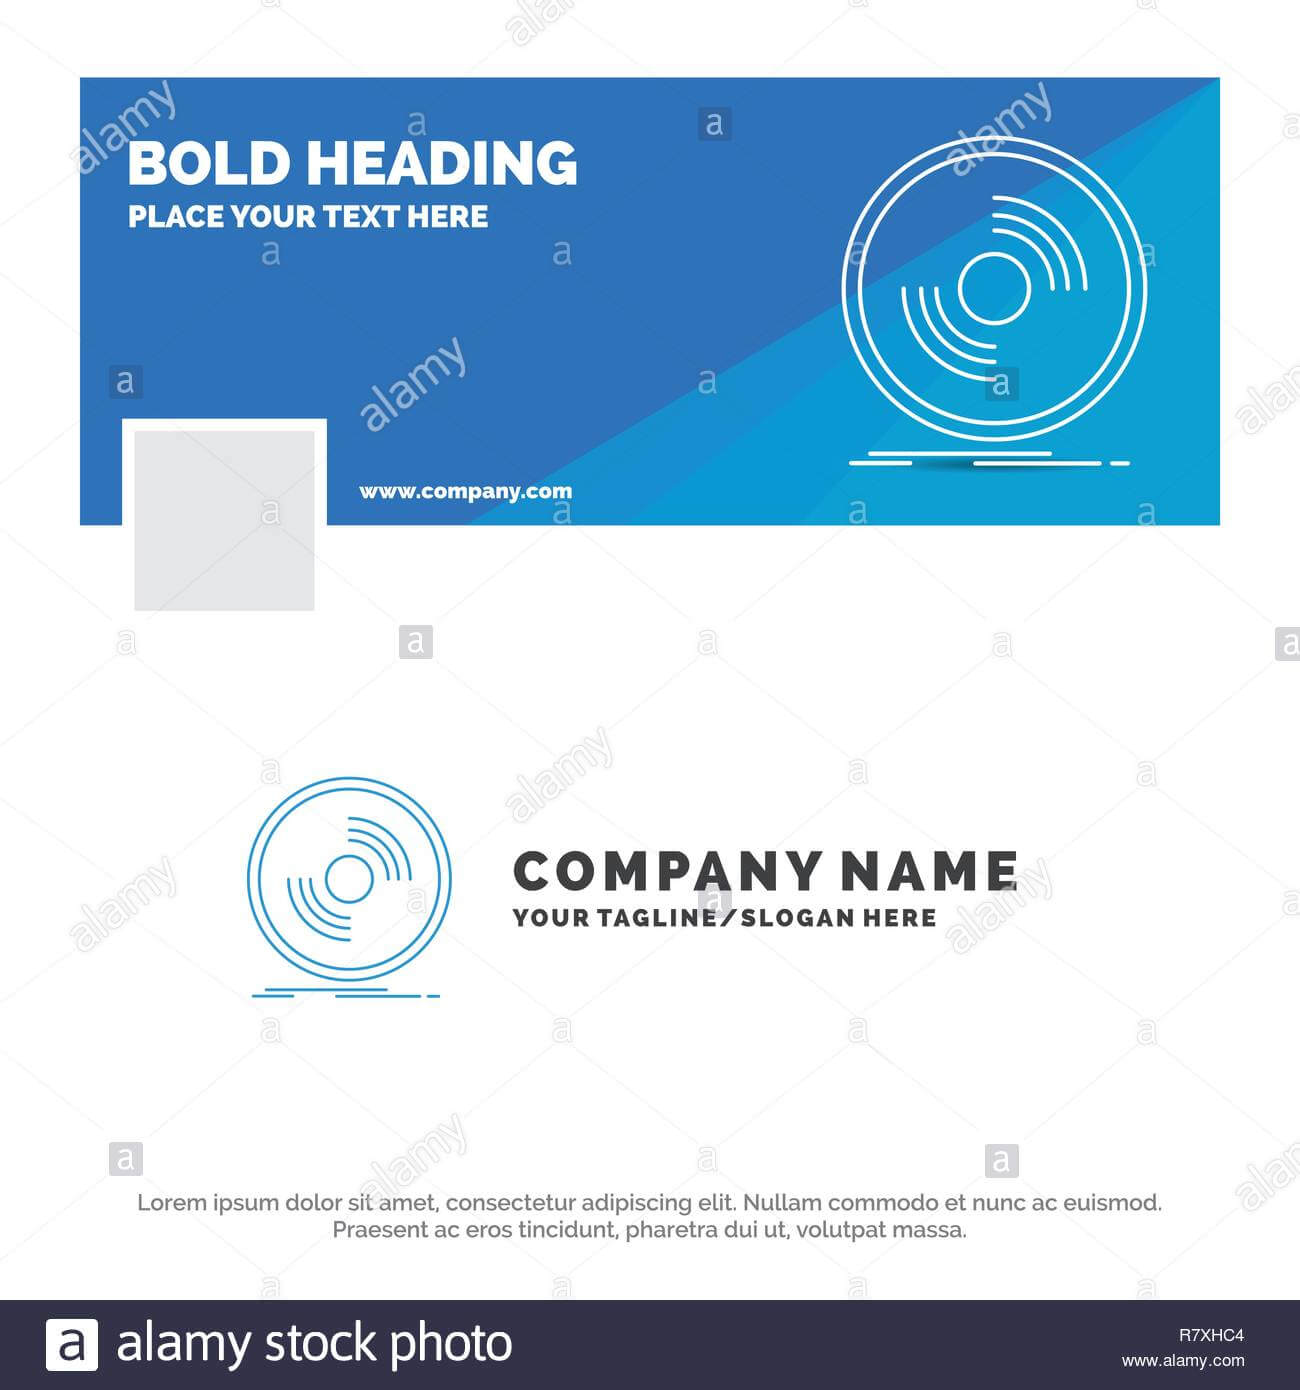 Blue Business Logo Template For Disc, Dj, Phonograph, Record With Vinyl Banner Design Templates